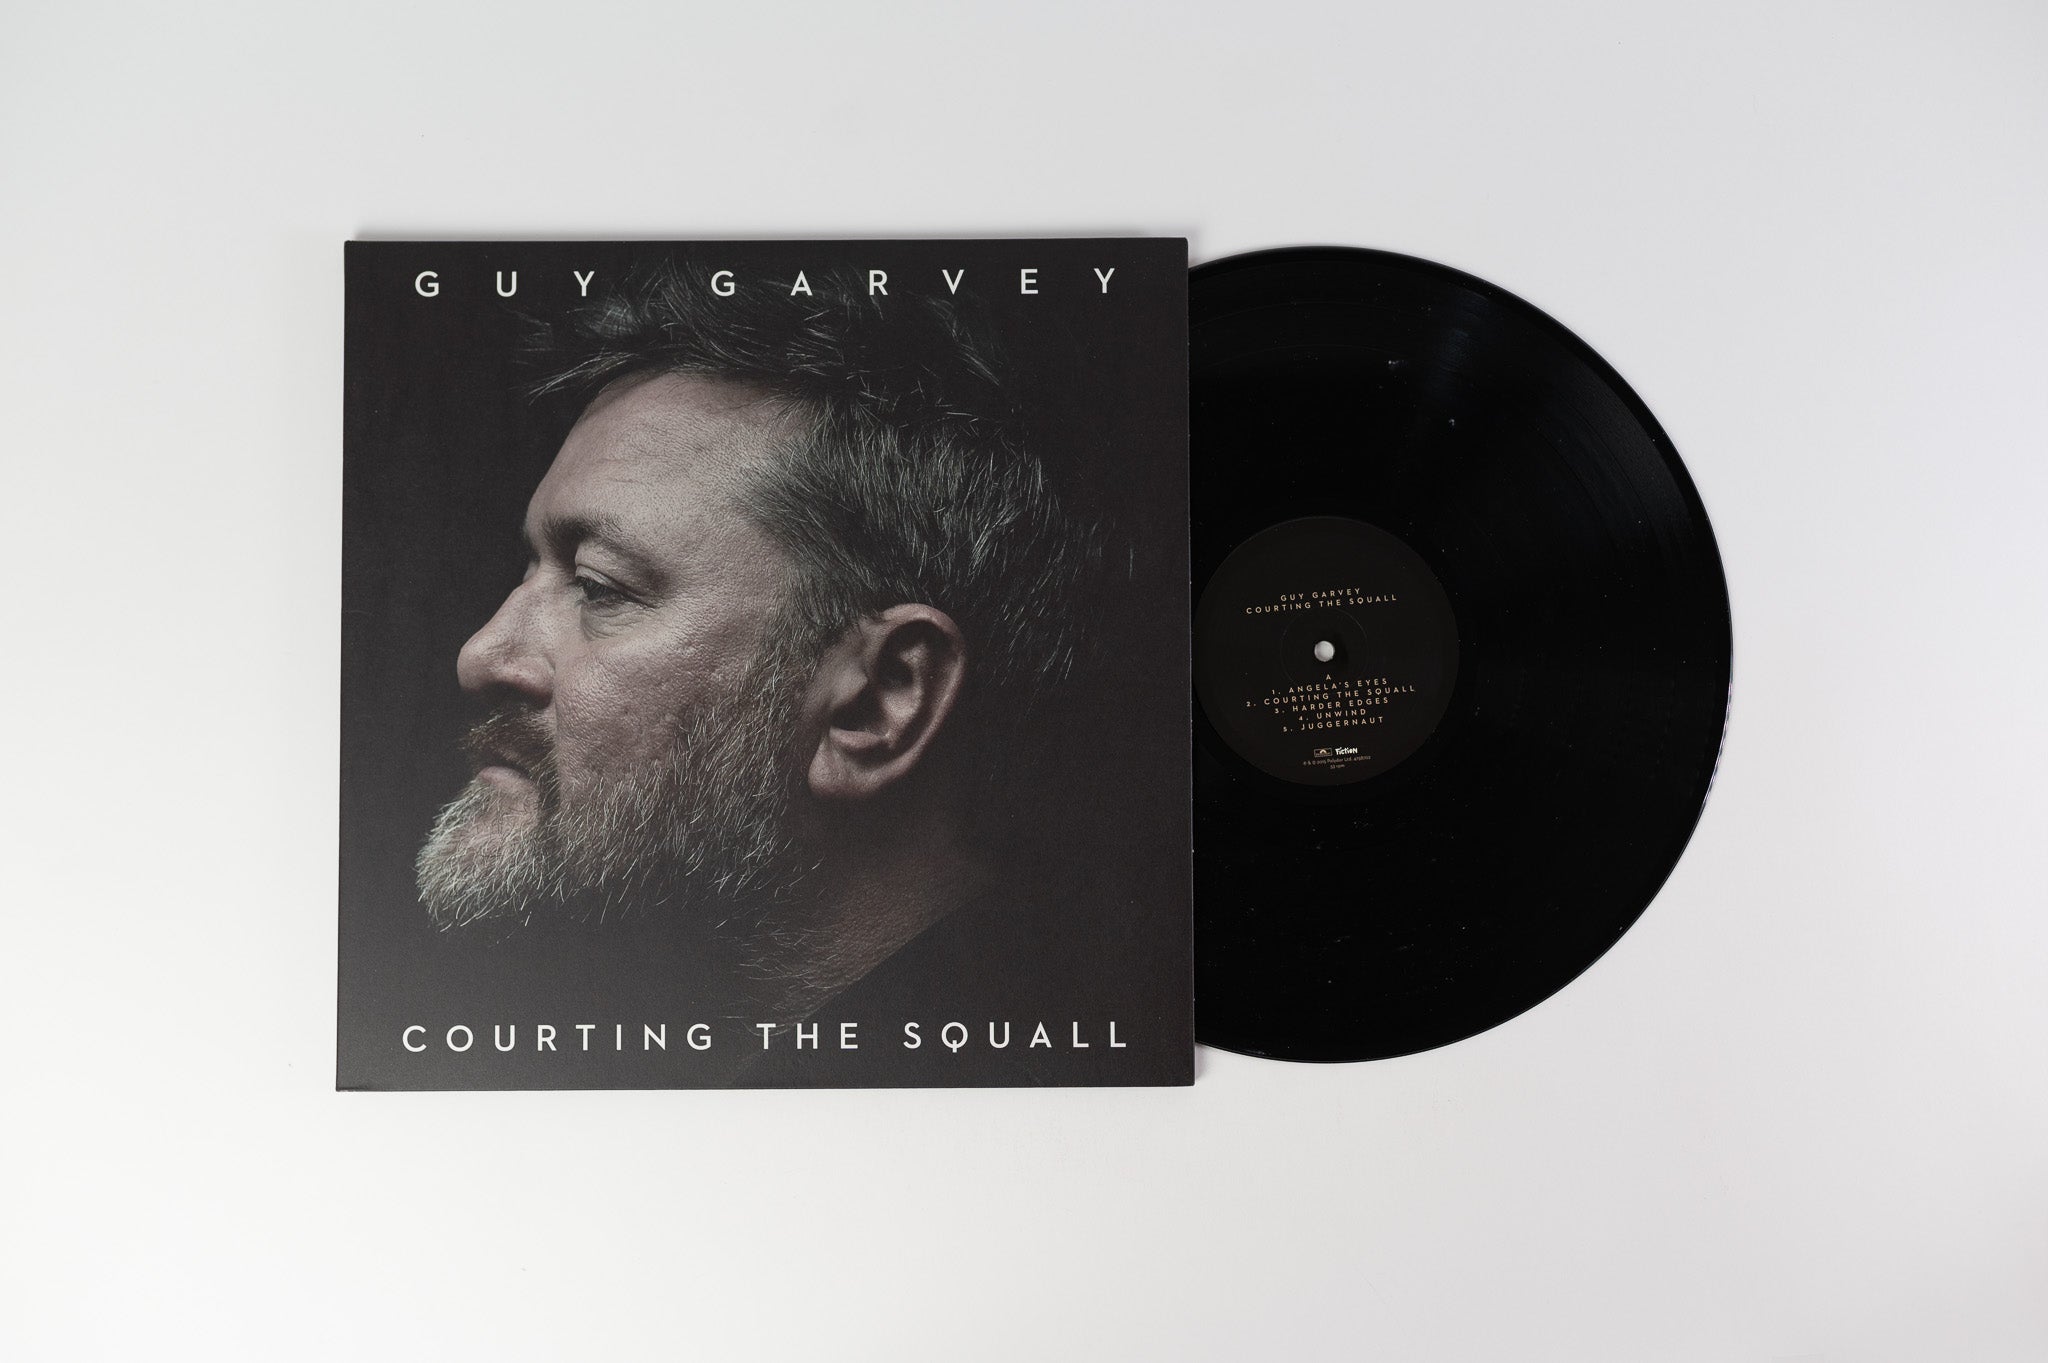 Guy Garvey - Courting The Squall on Polydor / Fiction Records